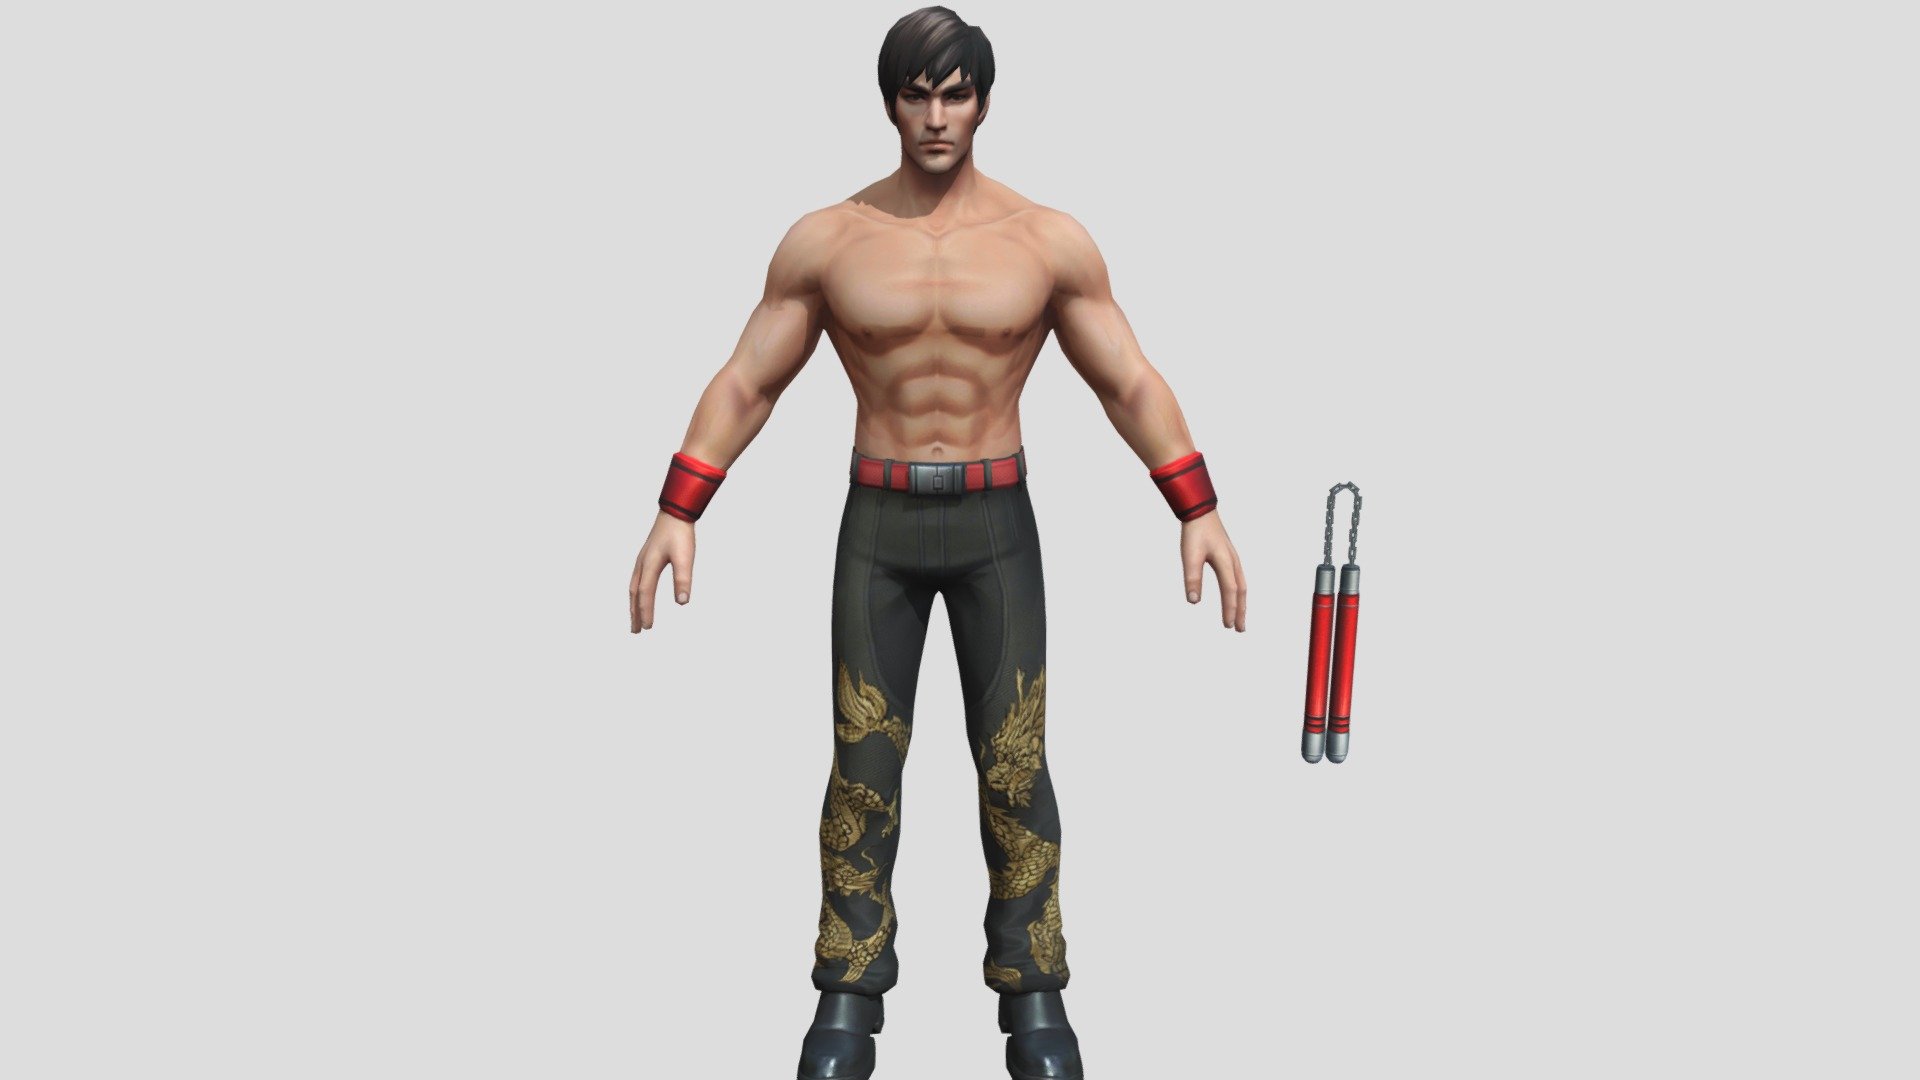 💙JOIN TELEGRAM FOR MORE AMAZING MODELS : https://t.me/CAPTAAINROFFICIAL1

This is Modern Version of Shang-Chi You can Download It and can Use it in Your Animations 3d model